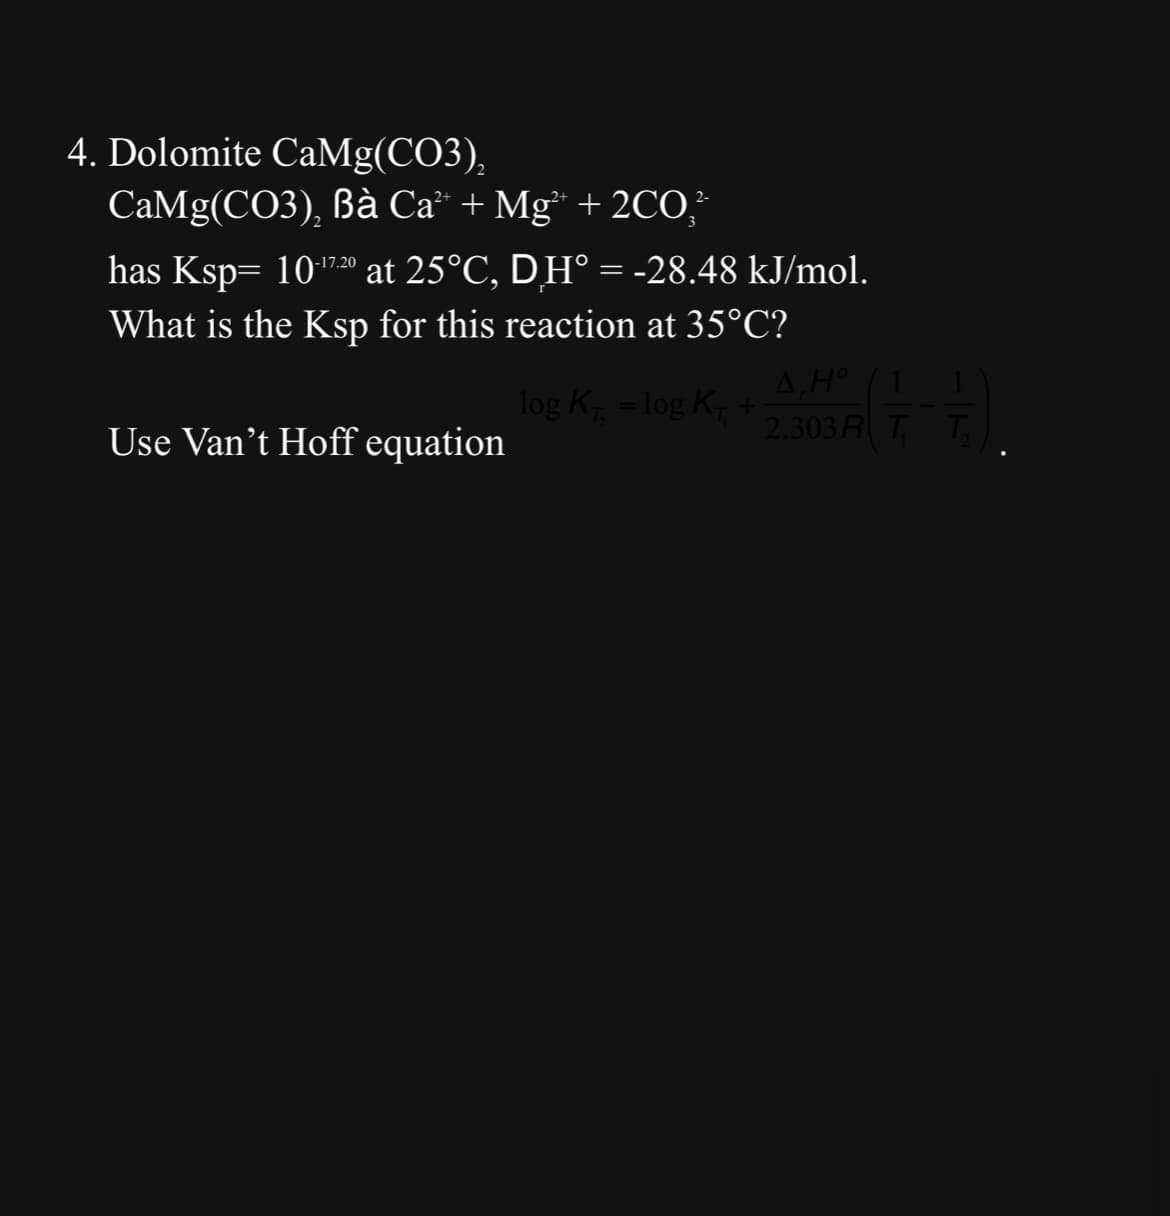 4. Dolomite CaMg(CO3),
CaMg(CO3), Bà Ca +Mg* +2CO
2-
has Ksp= 10:17.20 at 25°C, DH° = -28.48 kJ/mol.
What is the Ksp for this reaction at 35°C?
Use Van't Hoff equation
log K₁ = log K₁ +
4, Hº
A,H° 1
2.303 A(7-7)
T